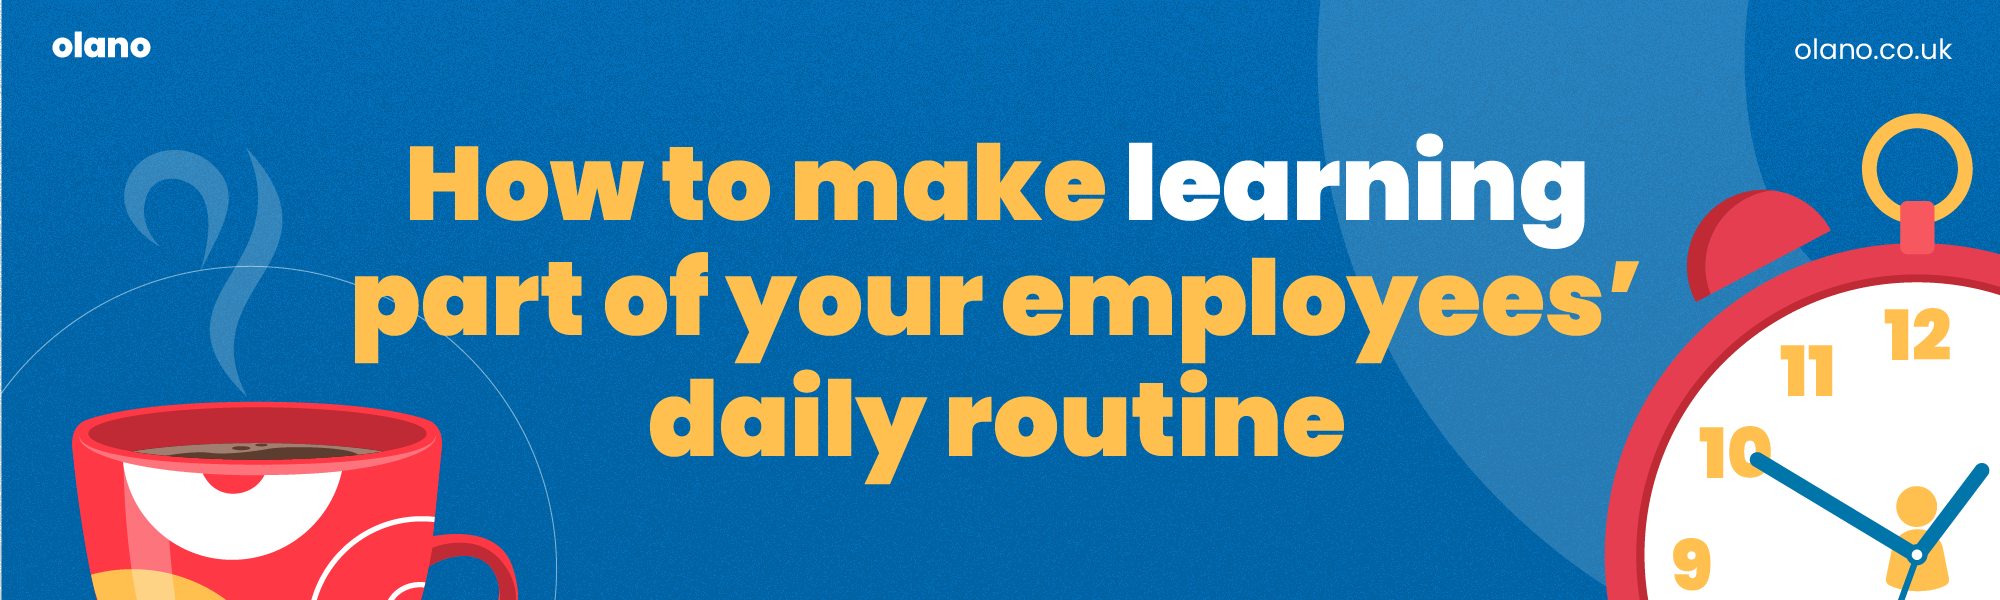 how to make learning part of your employees' daily routines